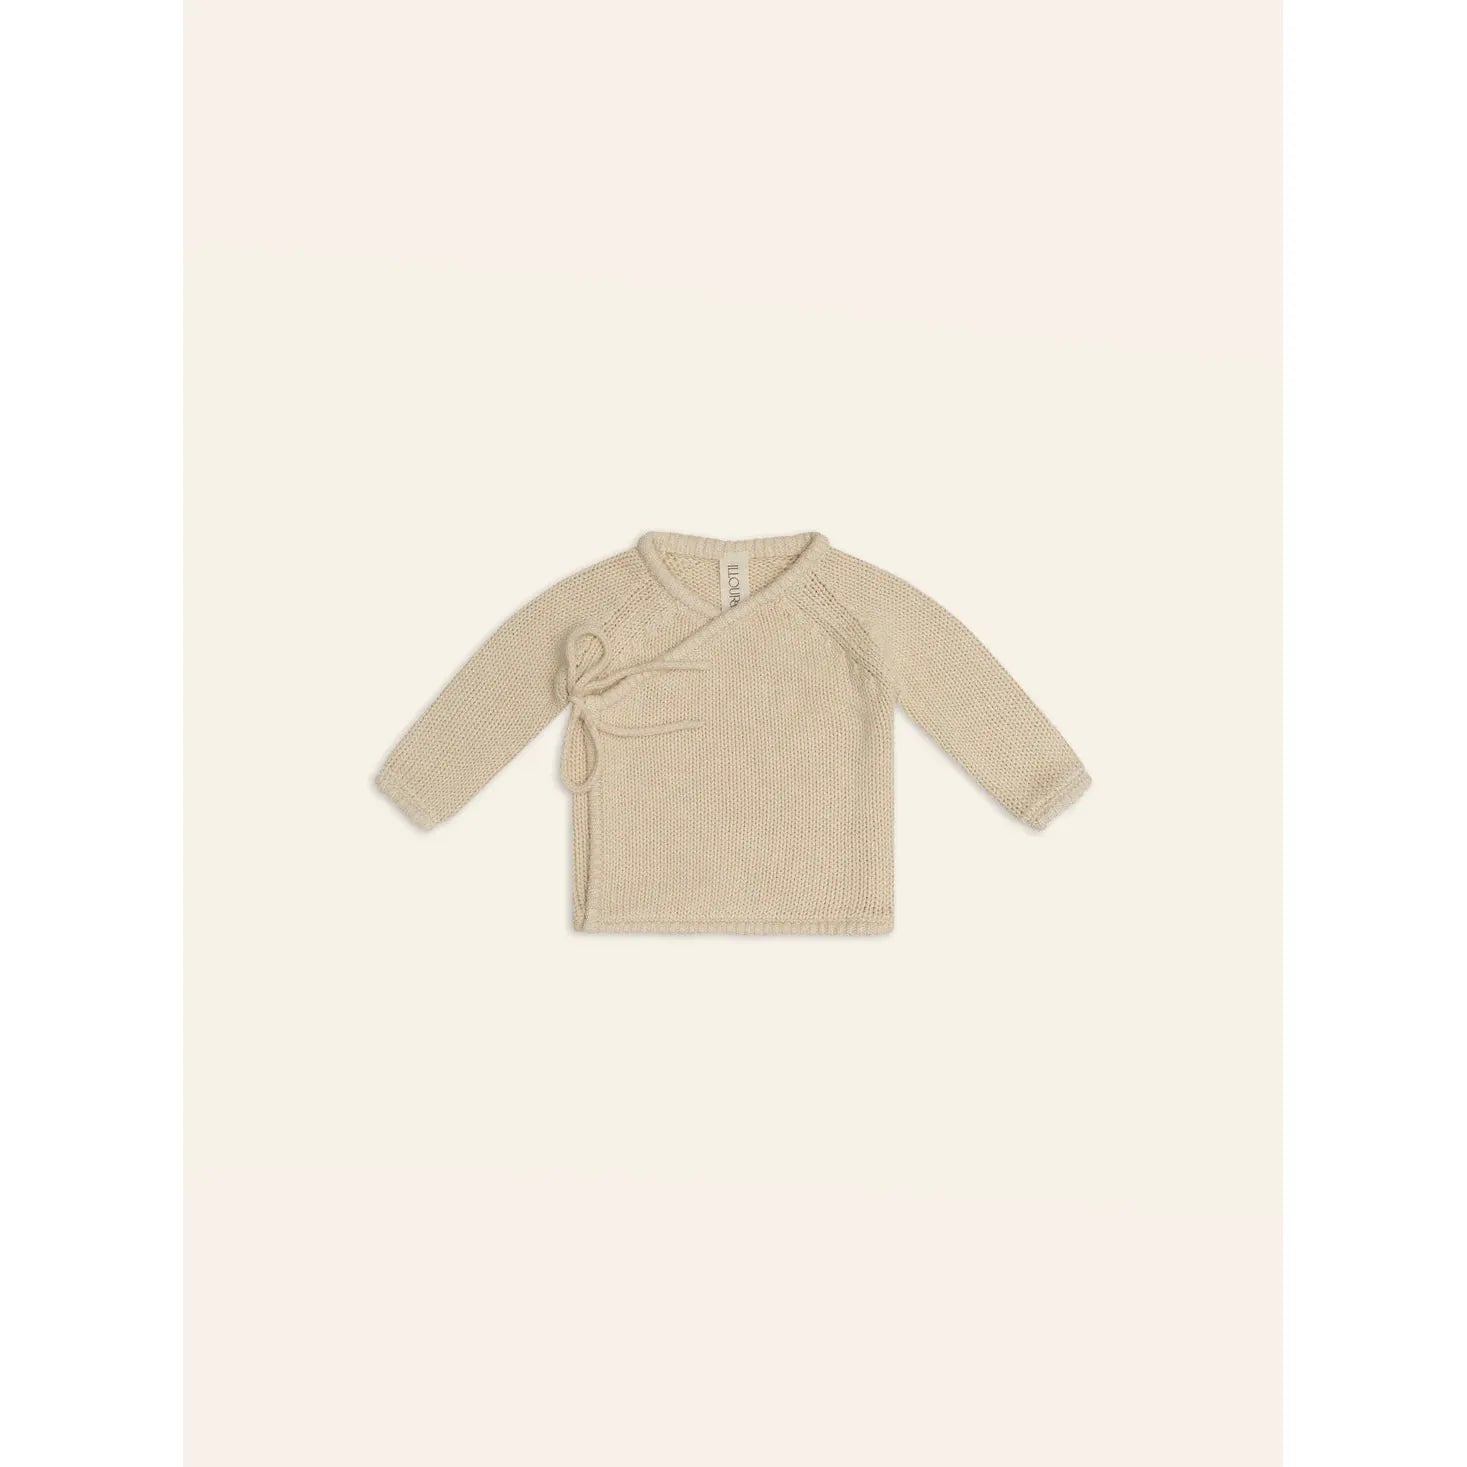 Illoura The Label Poet Knit Jumper - Biscuit